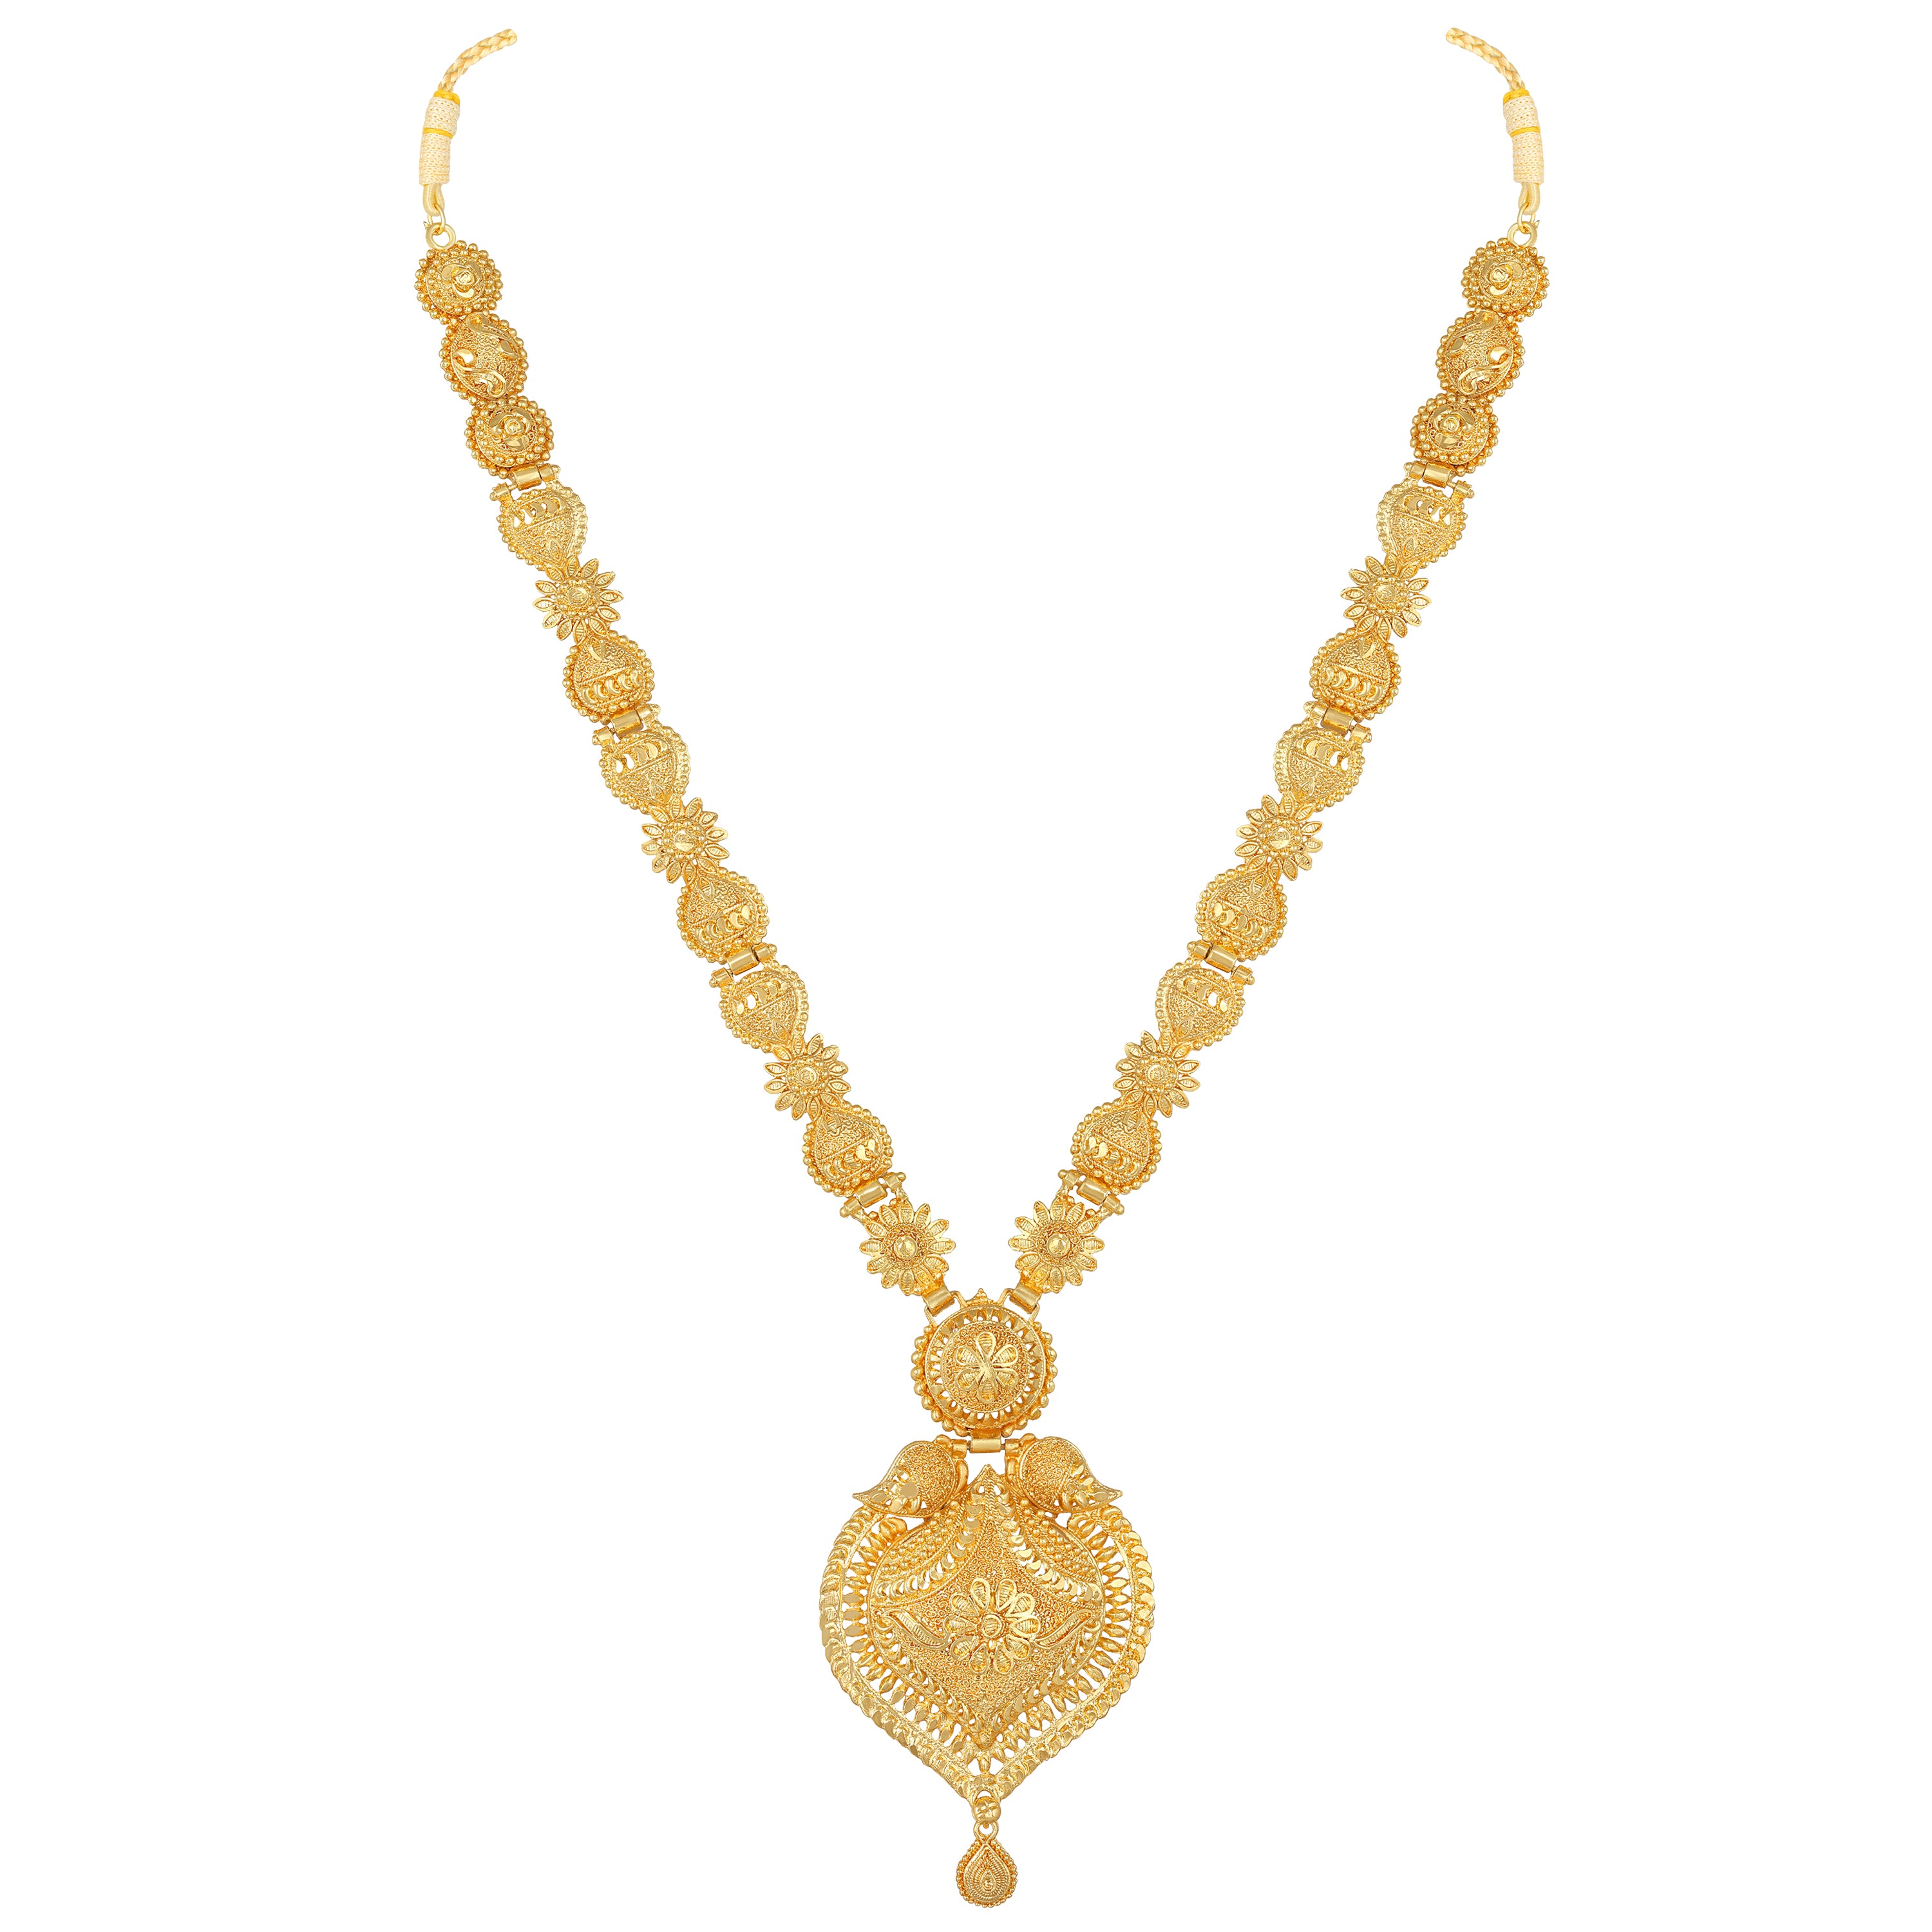 One gram gold plated long necklace set